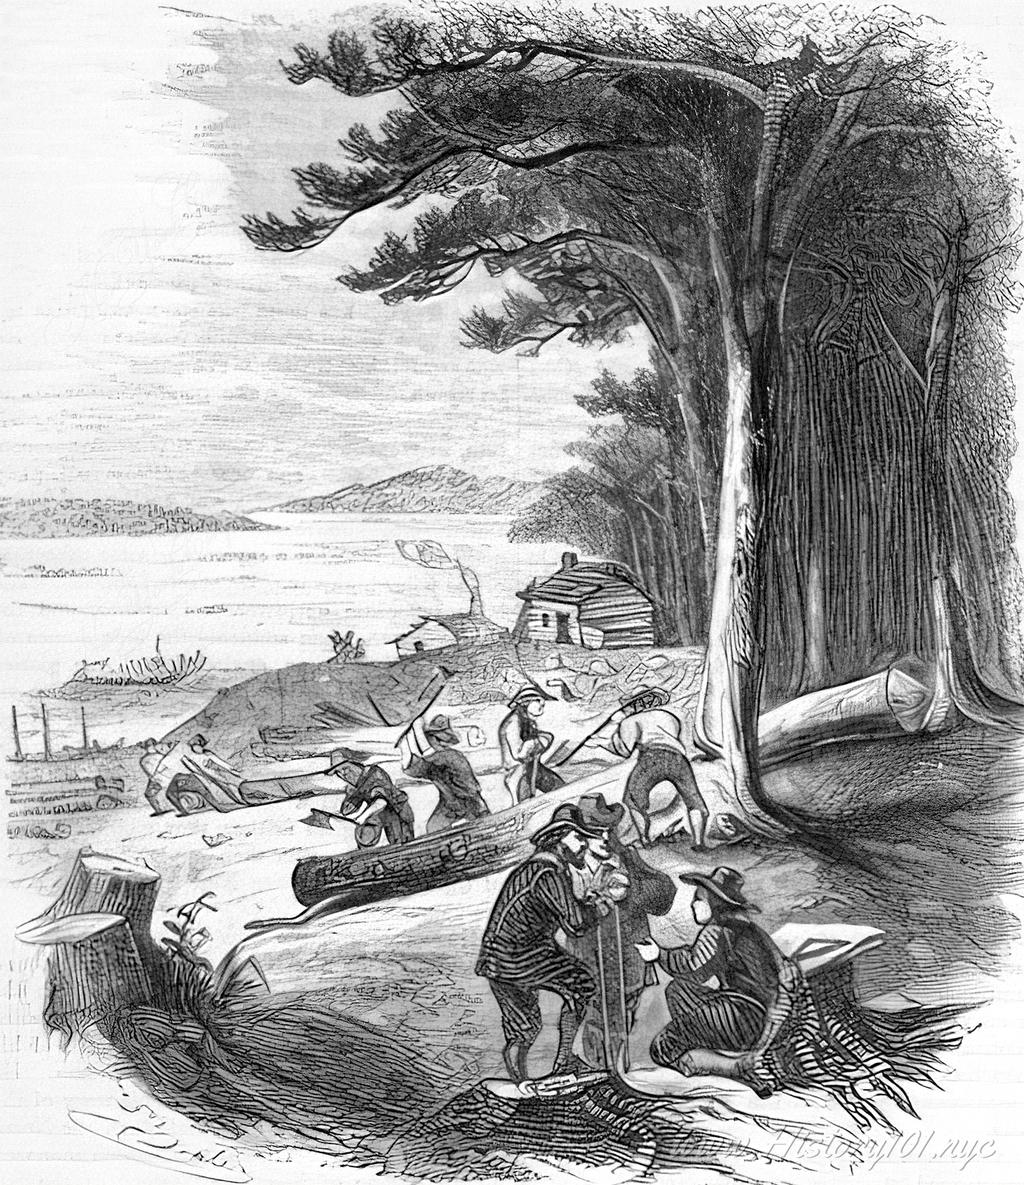 Illustration of merchants trading and felling trees along the New York Harbor.